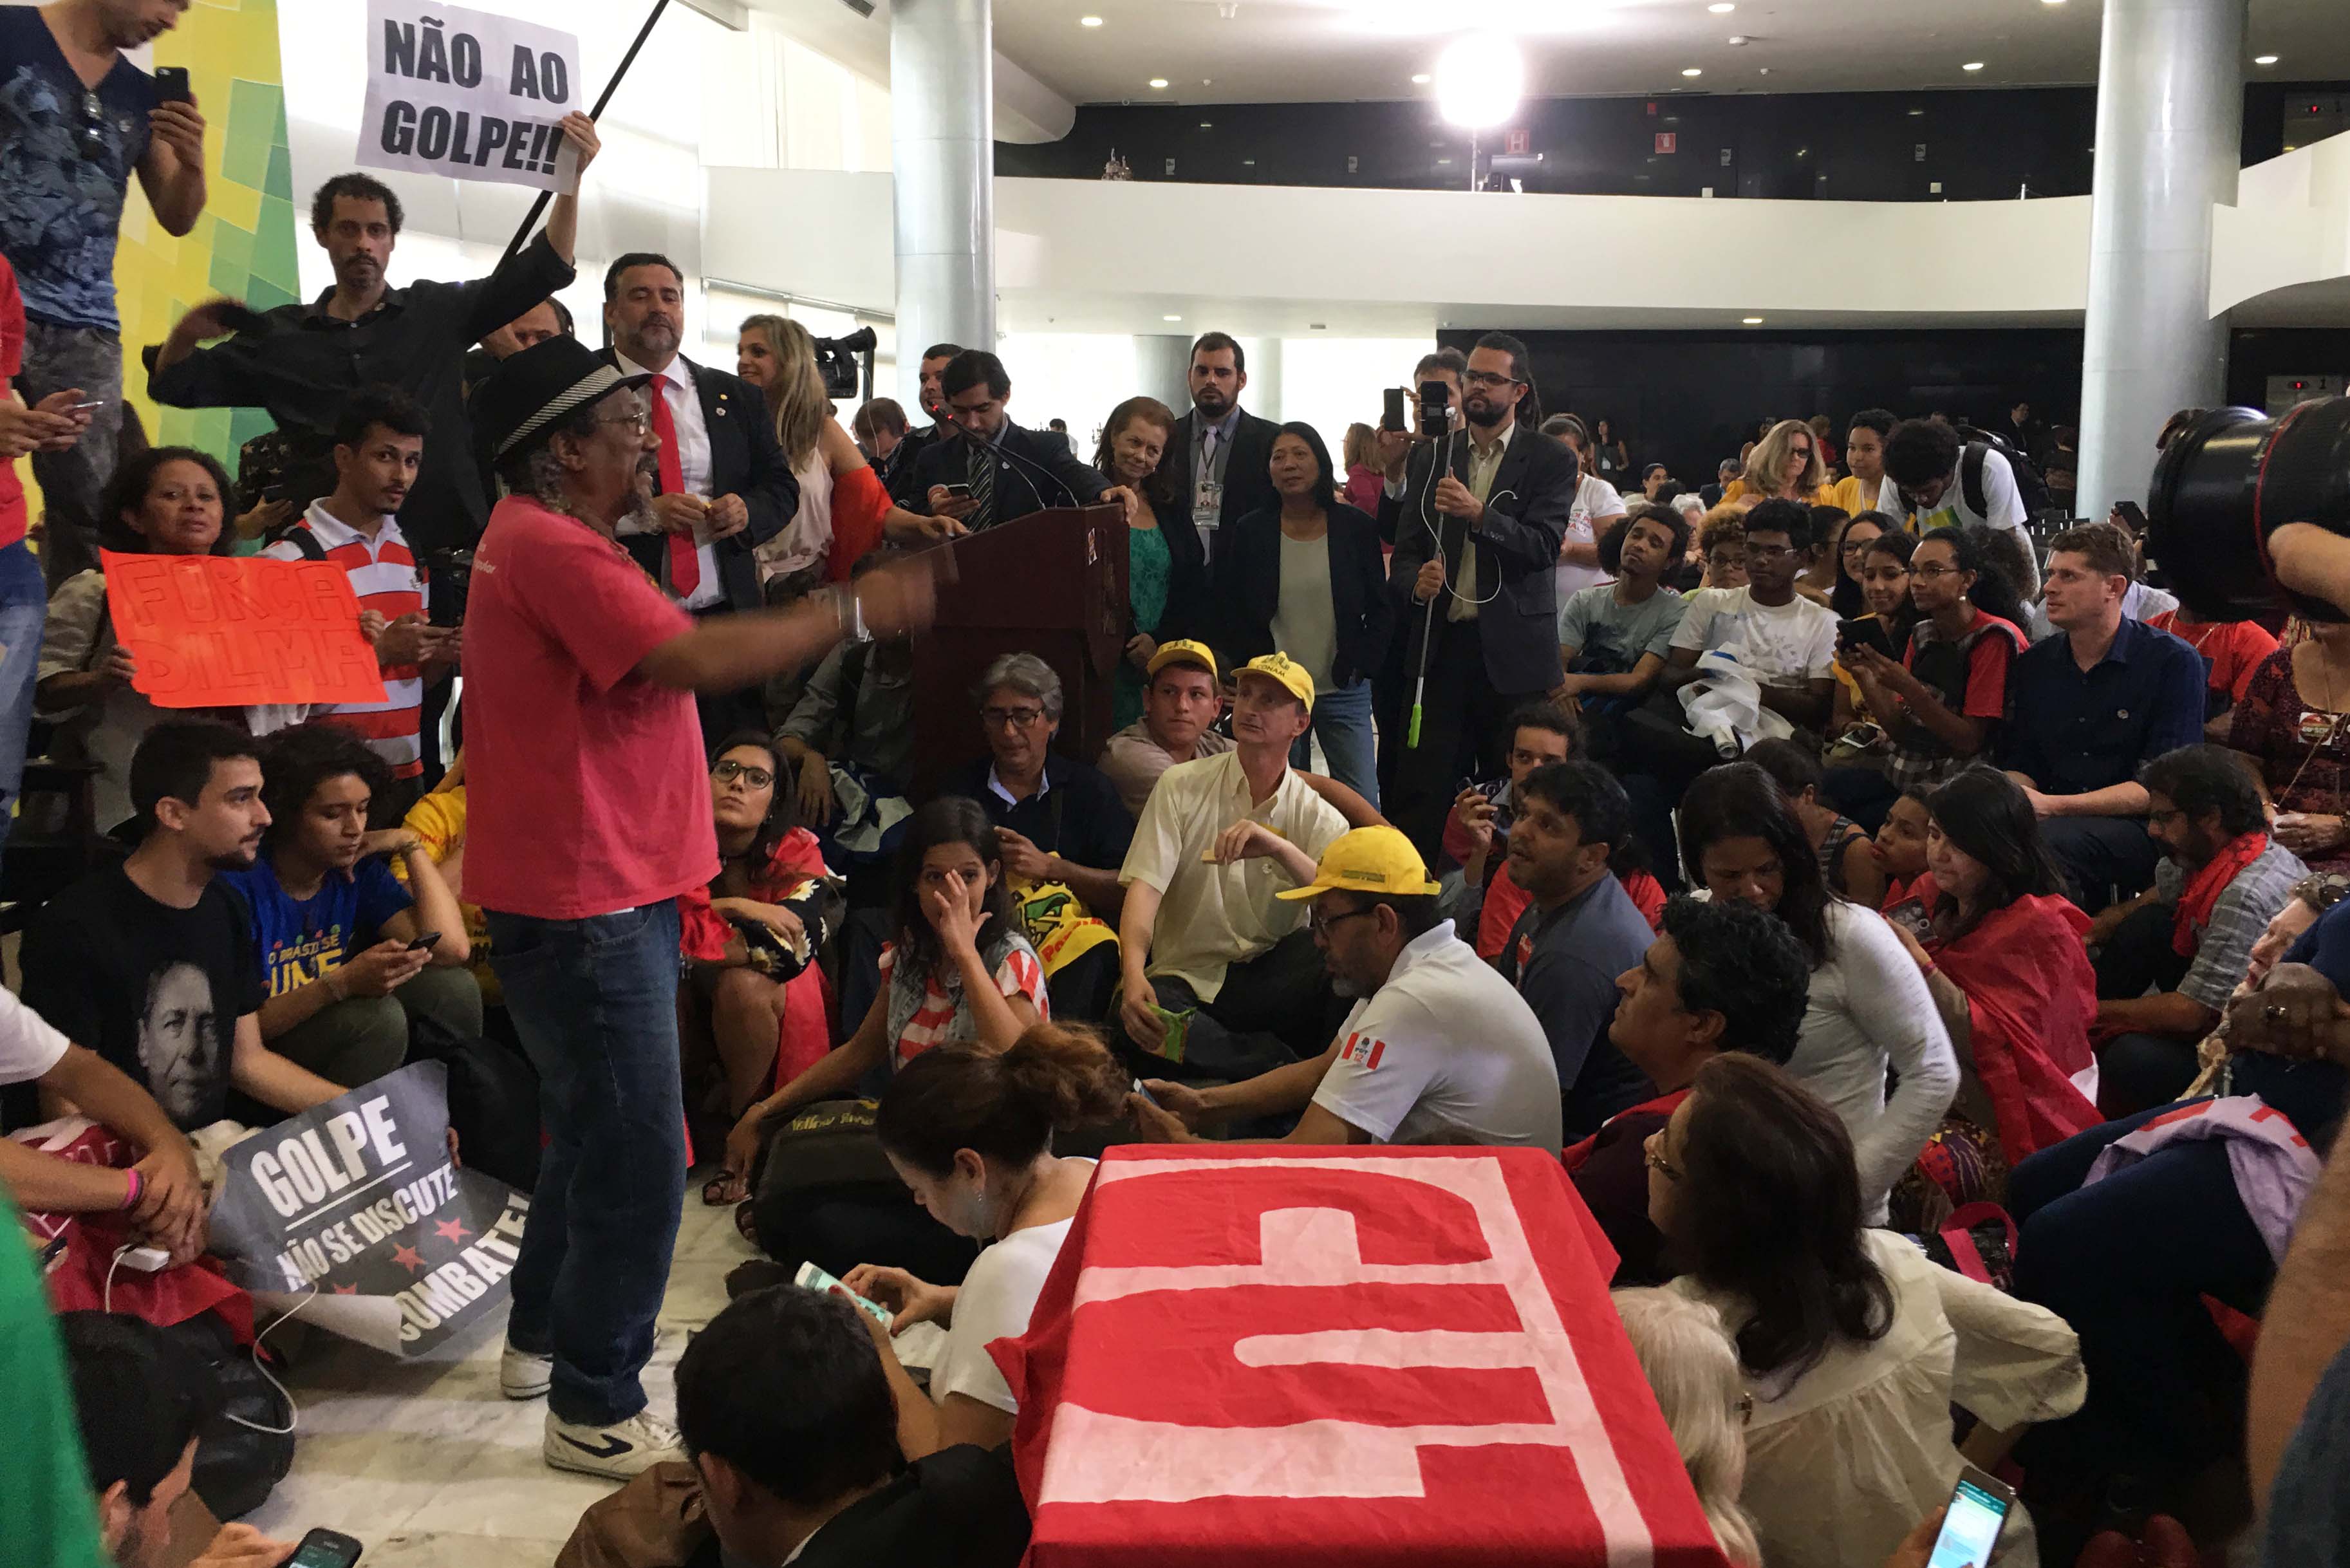 Rousseff's supporters occupied Planalto Palace, the president's official workplace (Image: Cleuci de Oliveira)